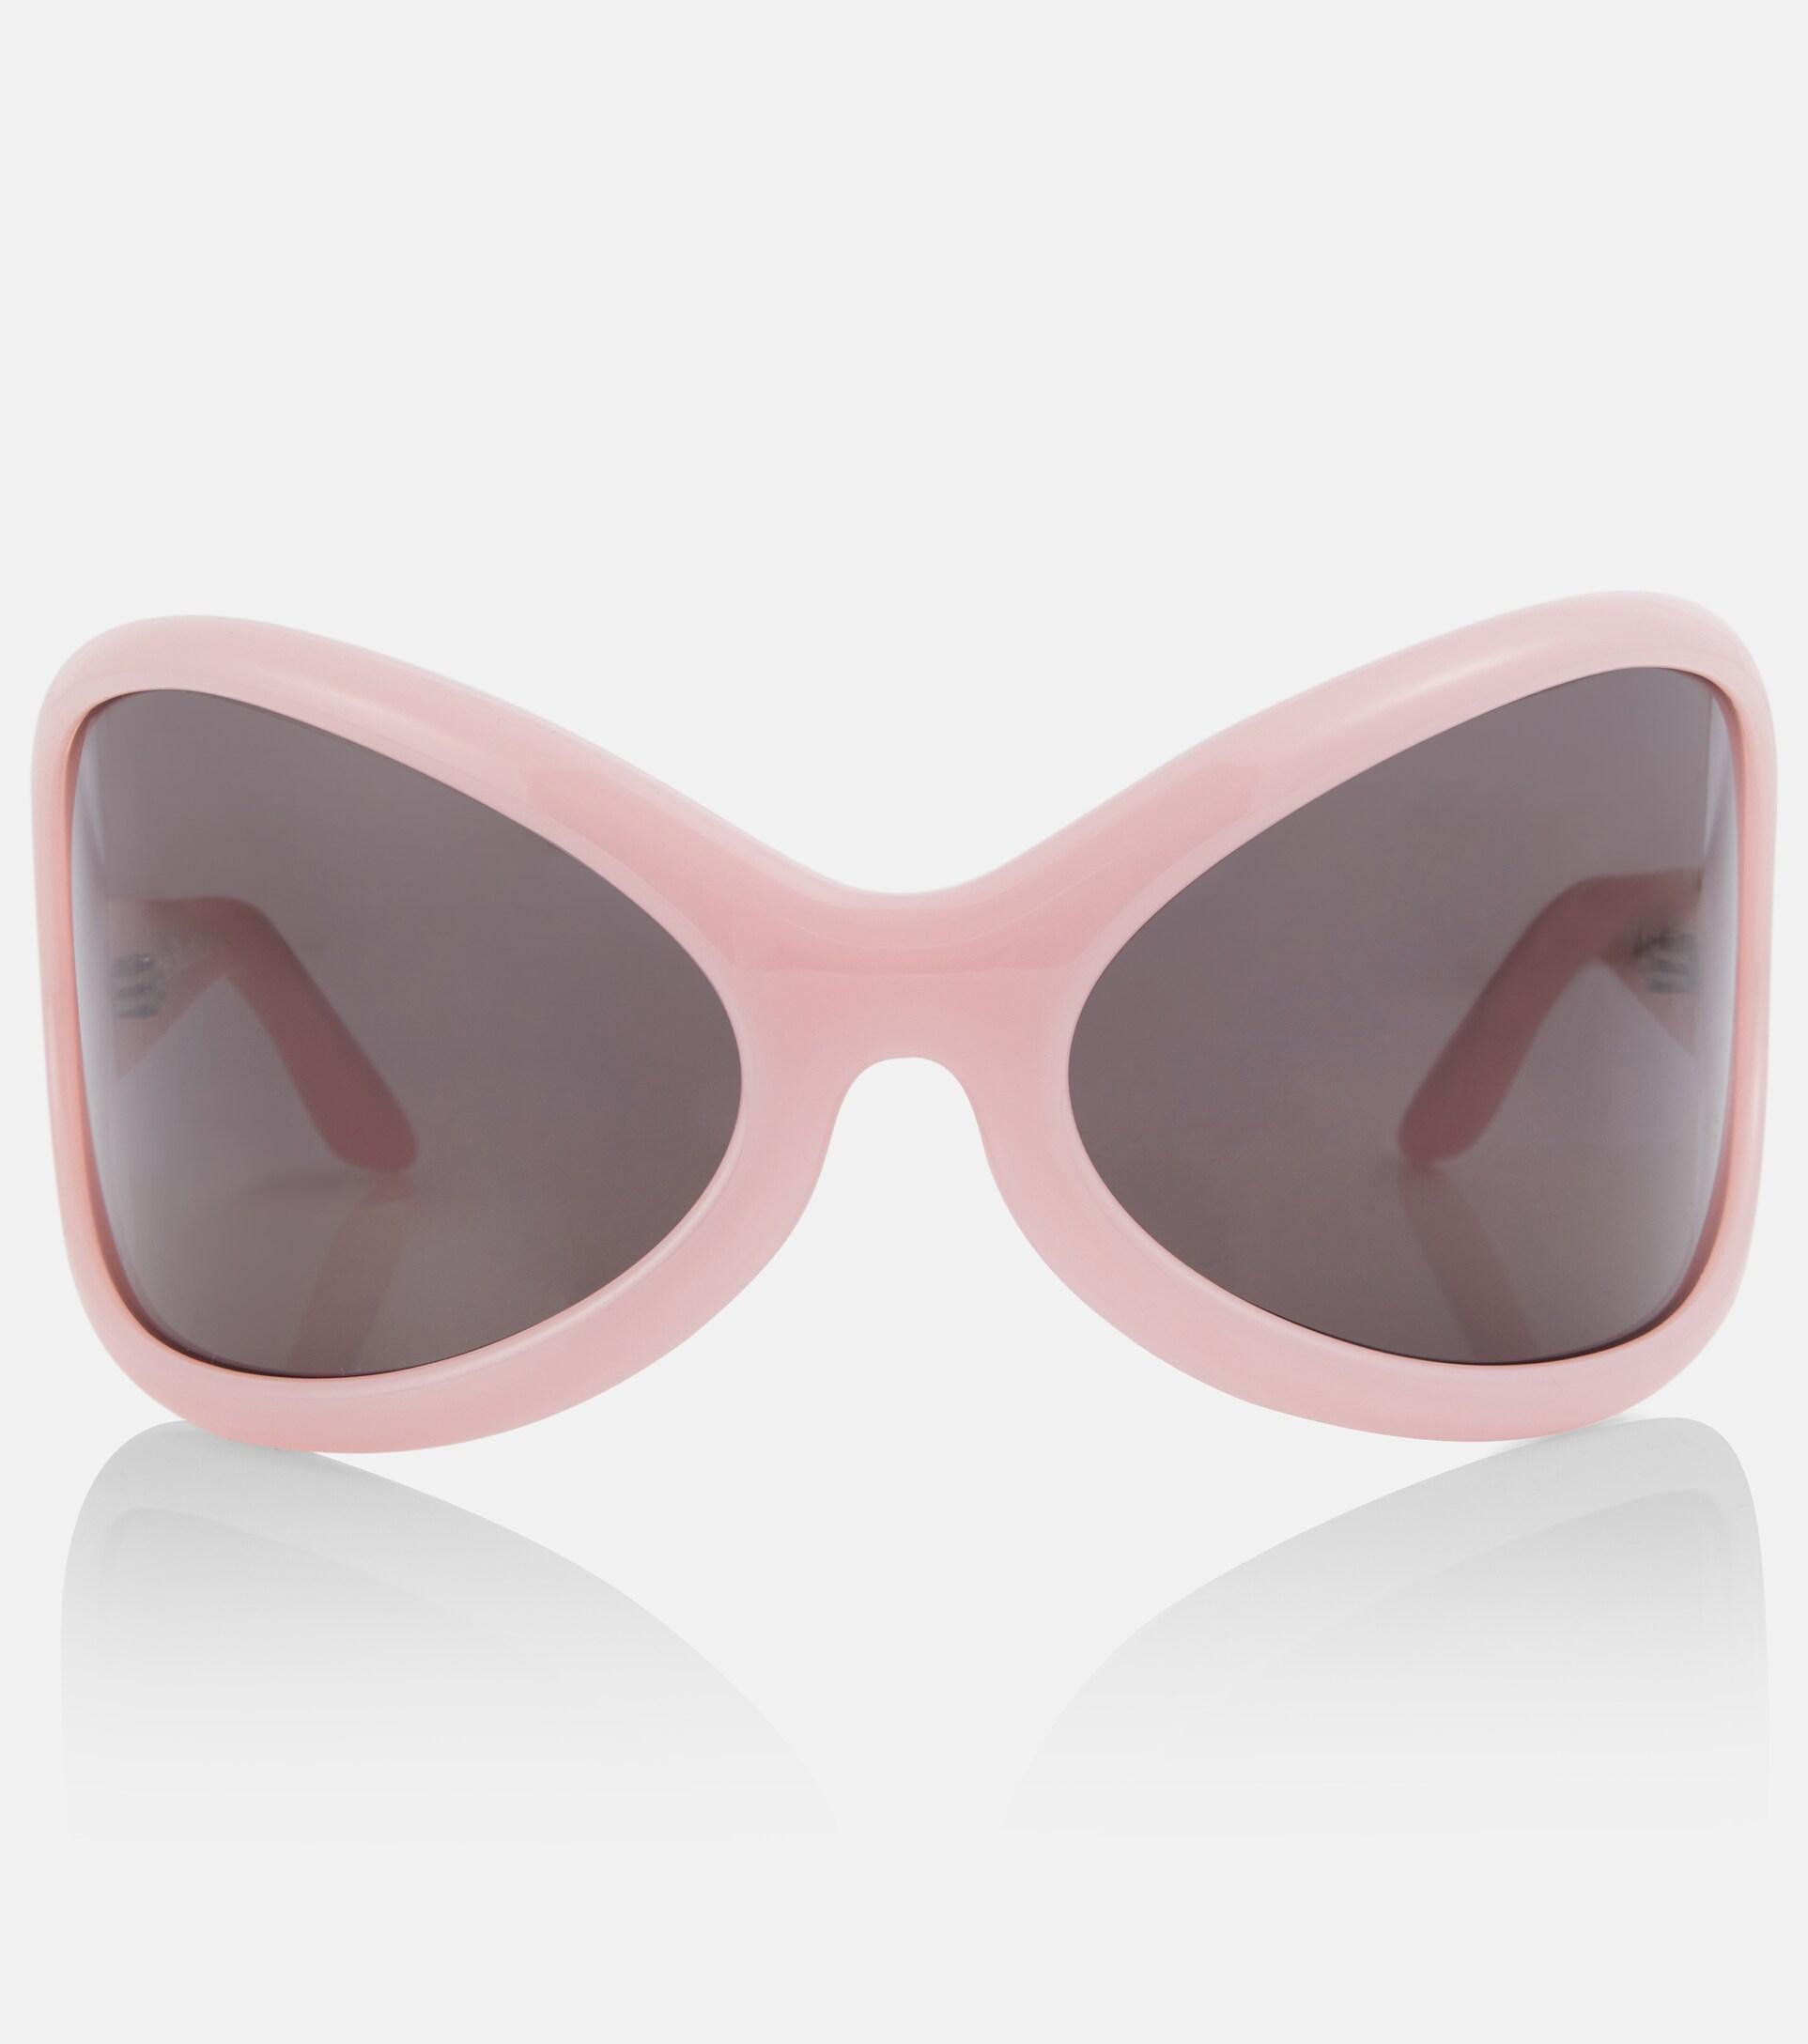 Acne Studios Oversized Sunglasses in Pink | Lyst